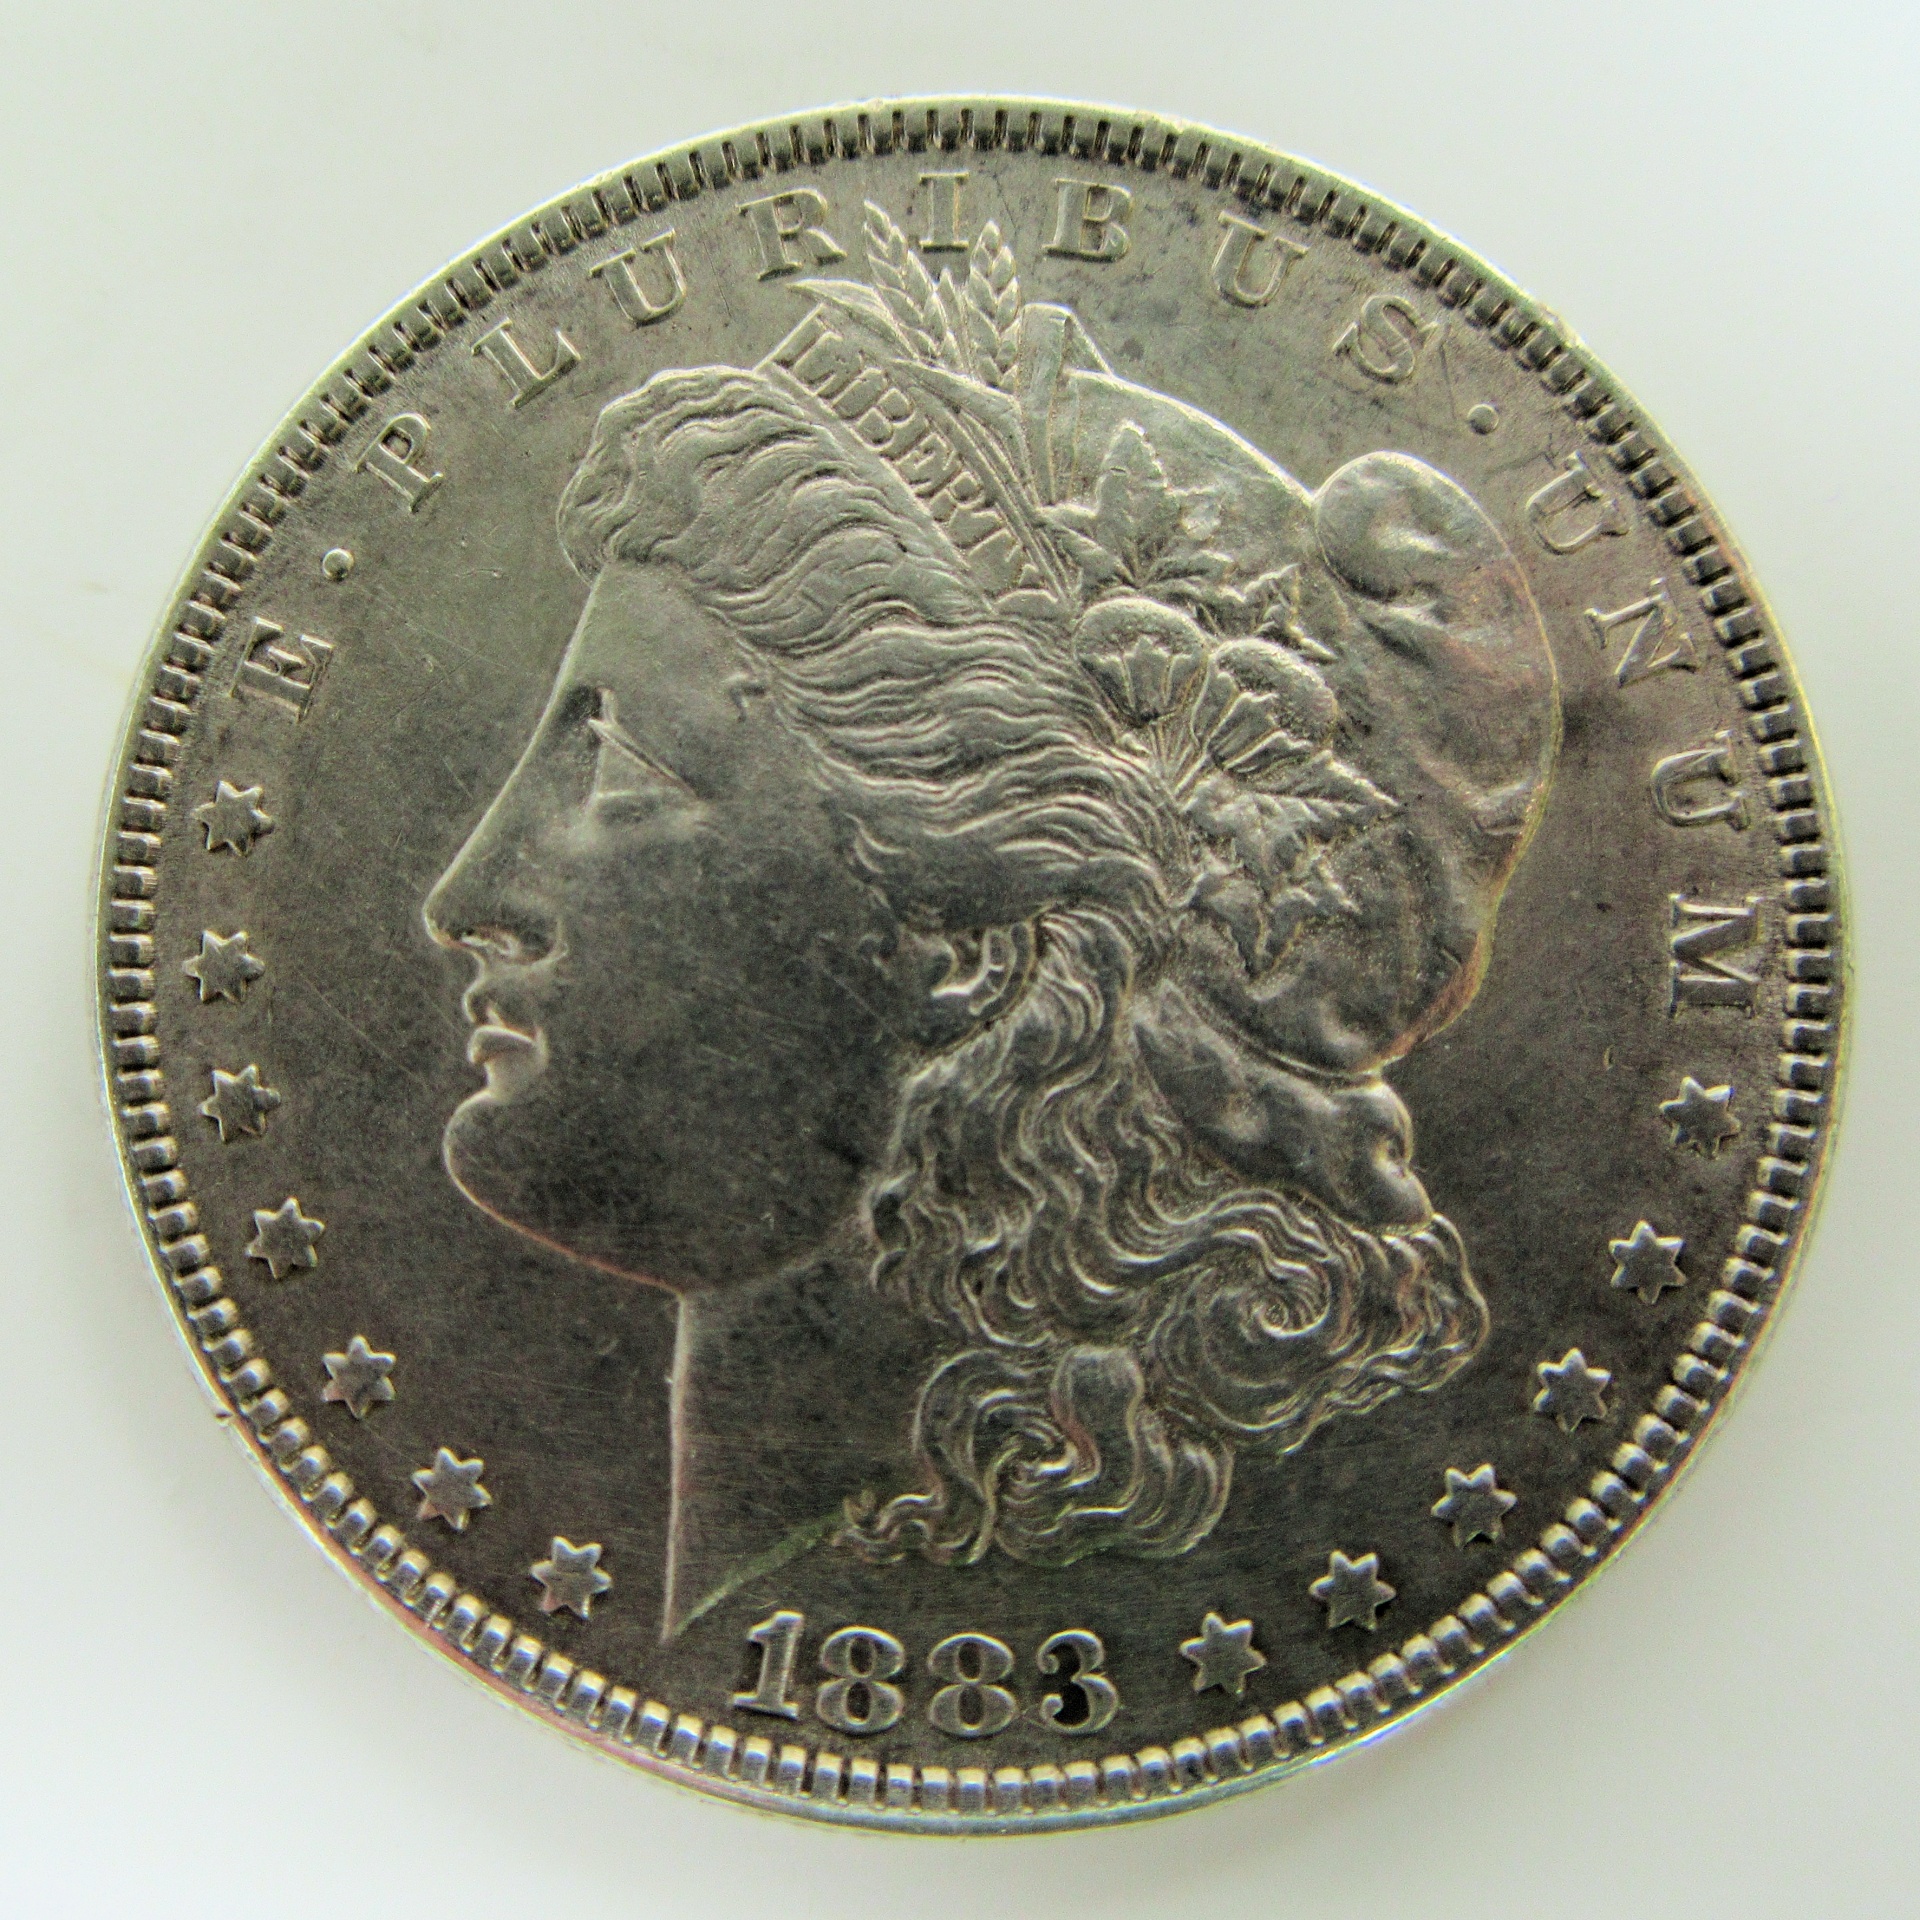 1883 morgan dollar isolated on white background obverse